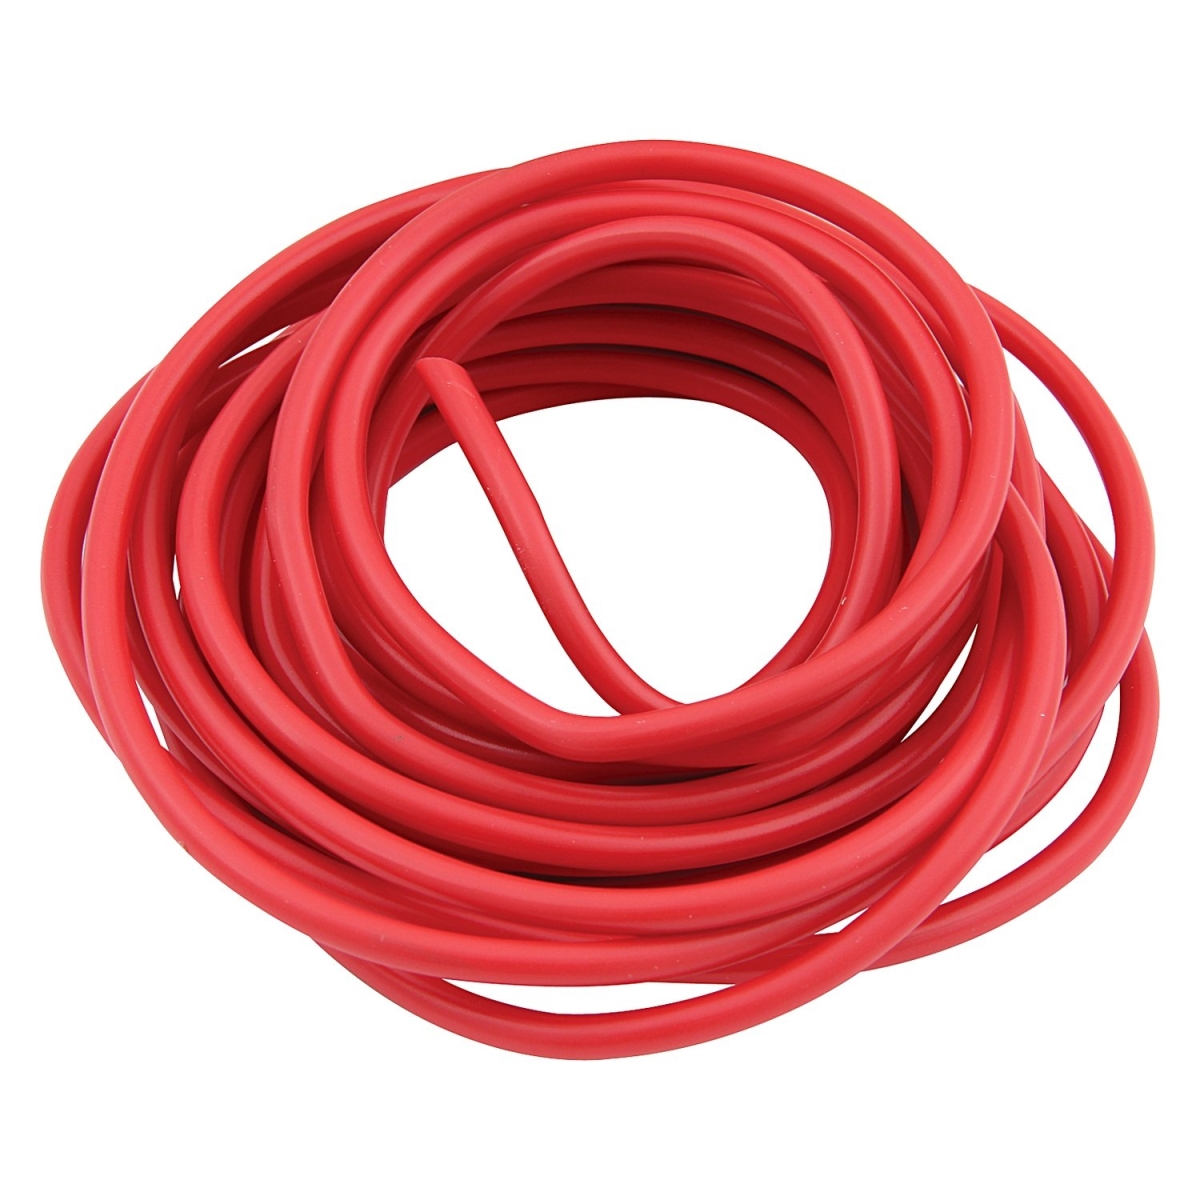 All76560 12 Ft. 12 Awg Red Primary Wire